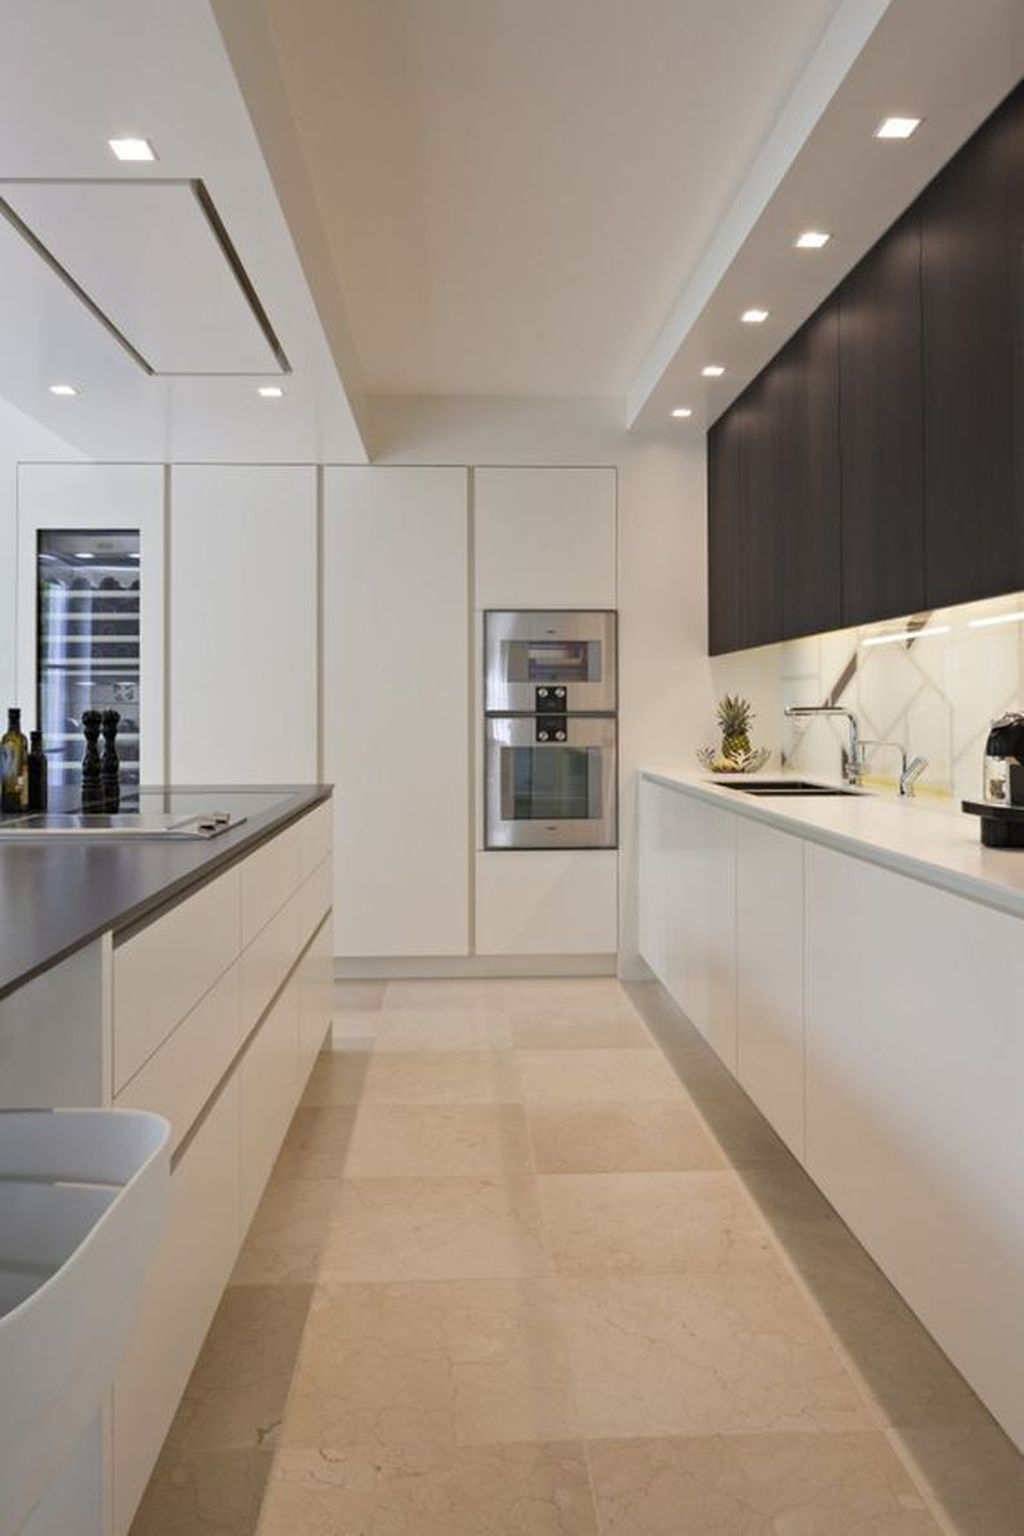 Elegant Minimalist Kitchen Design Ideas For Small Space To Try 17